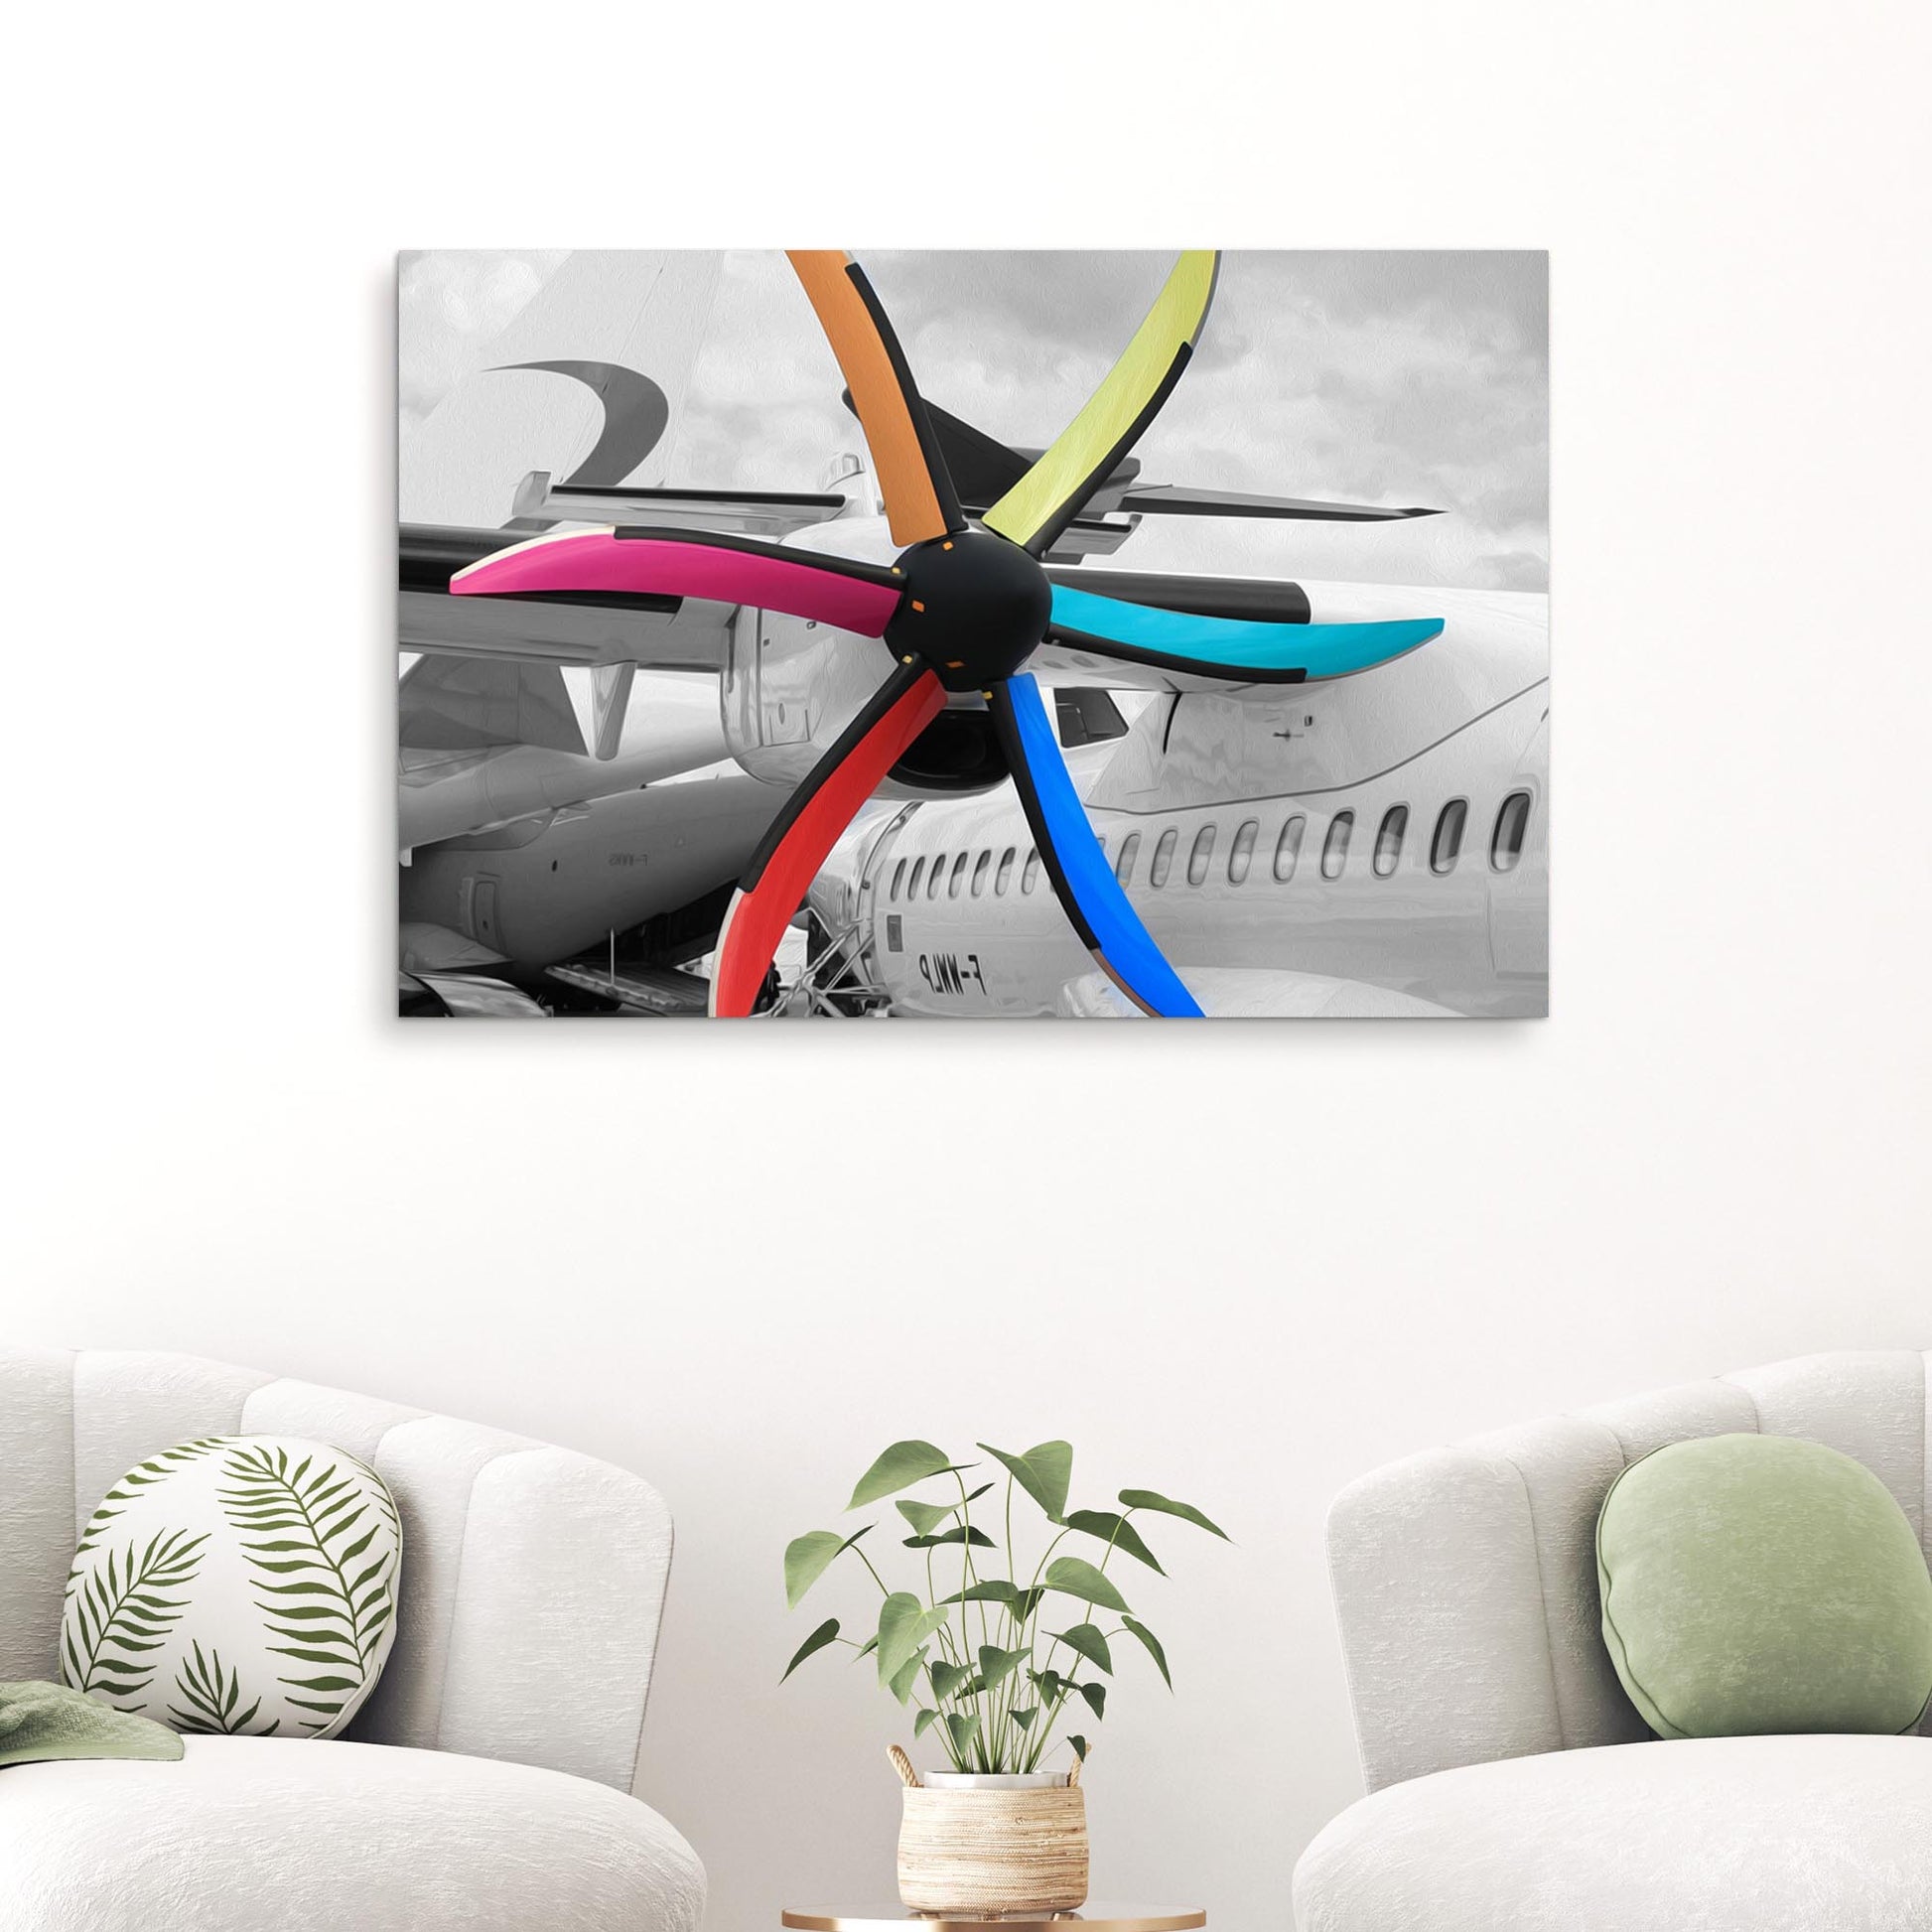 Plane Propeller Multicolored Canvas Wall Art - Image by Tailored Canvases